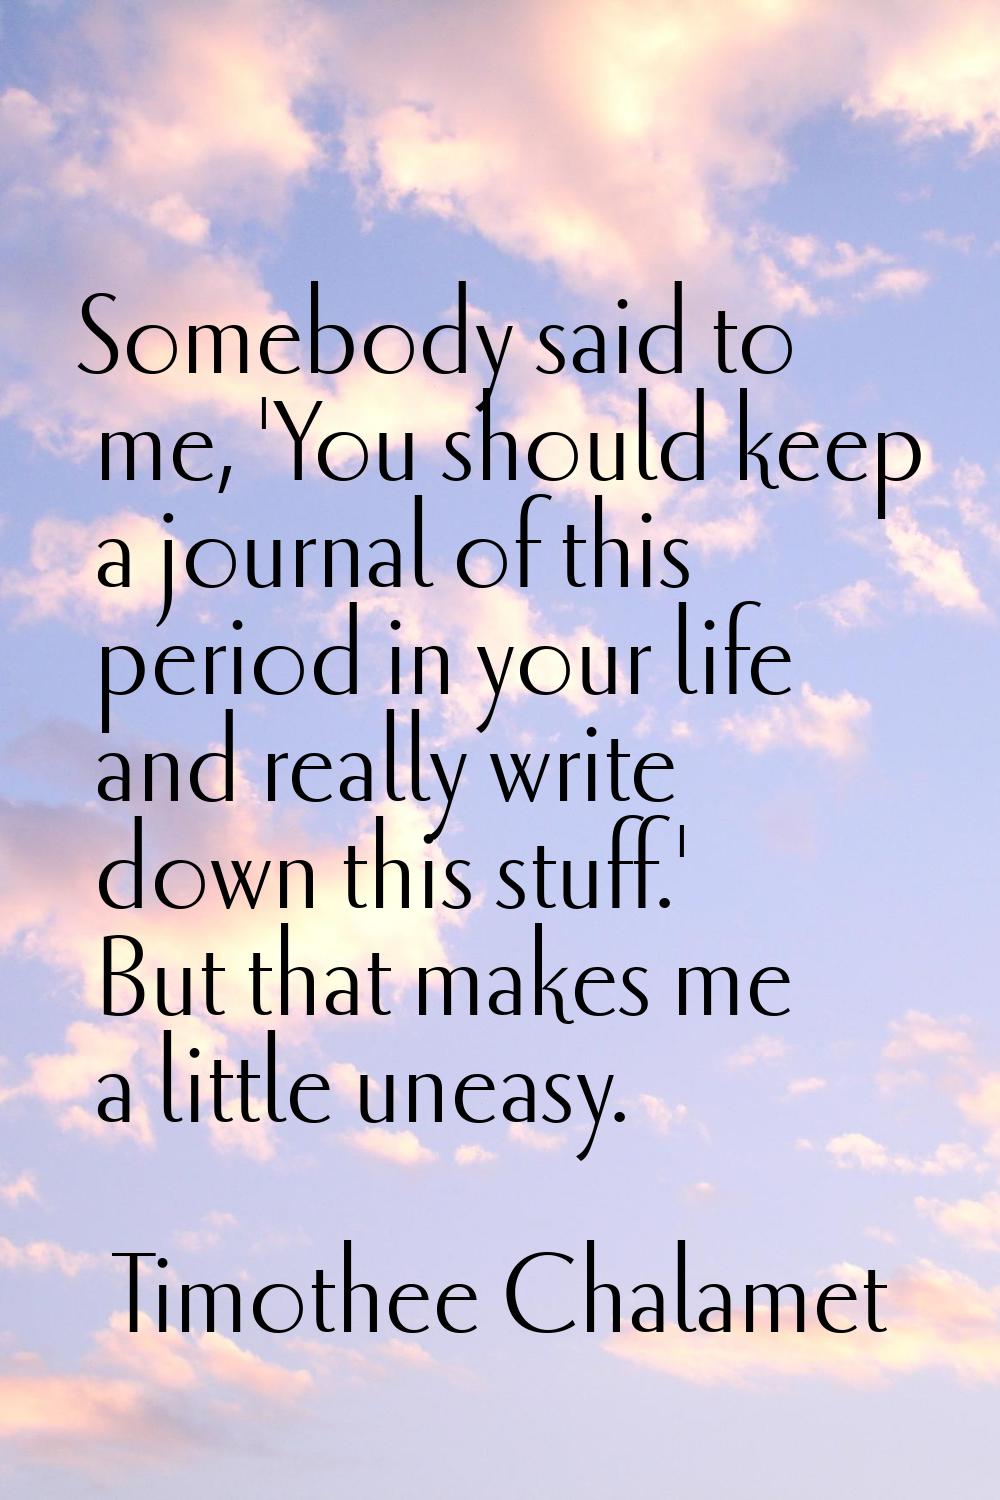 Somebody said to me, 'You should keep a journal of this period in your life and really write down t